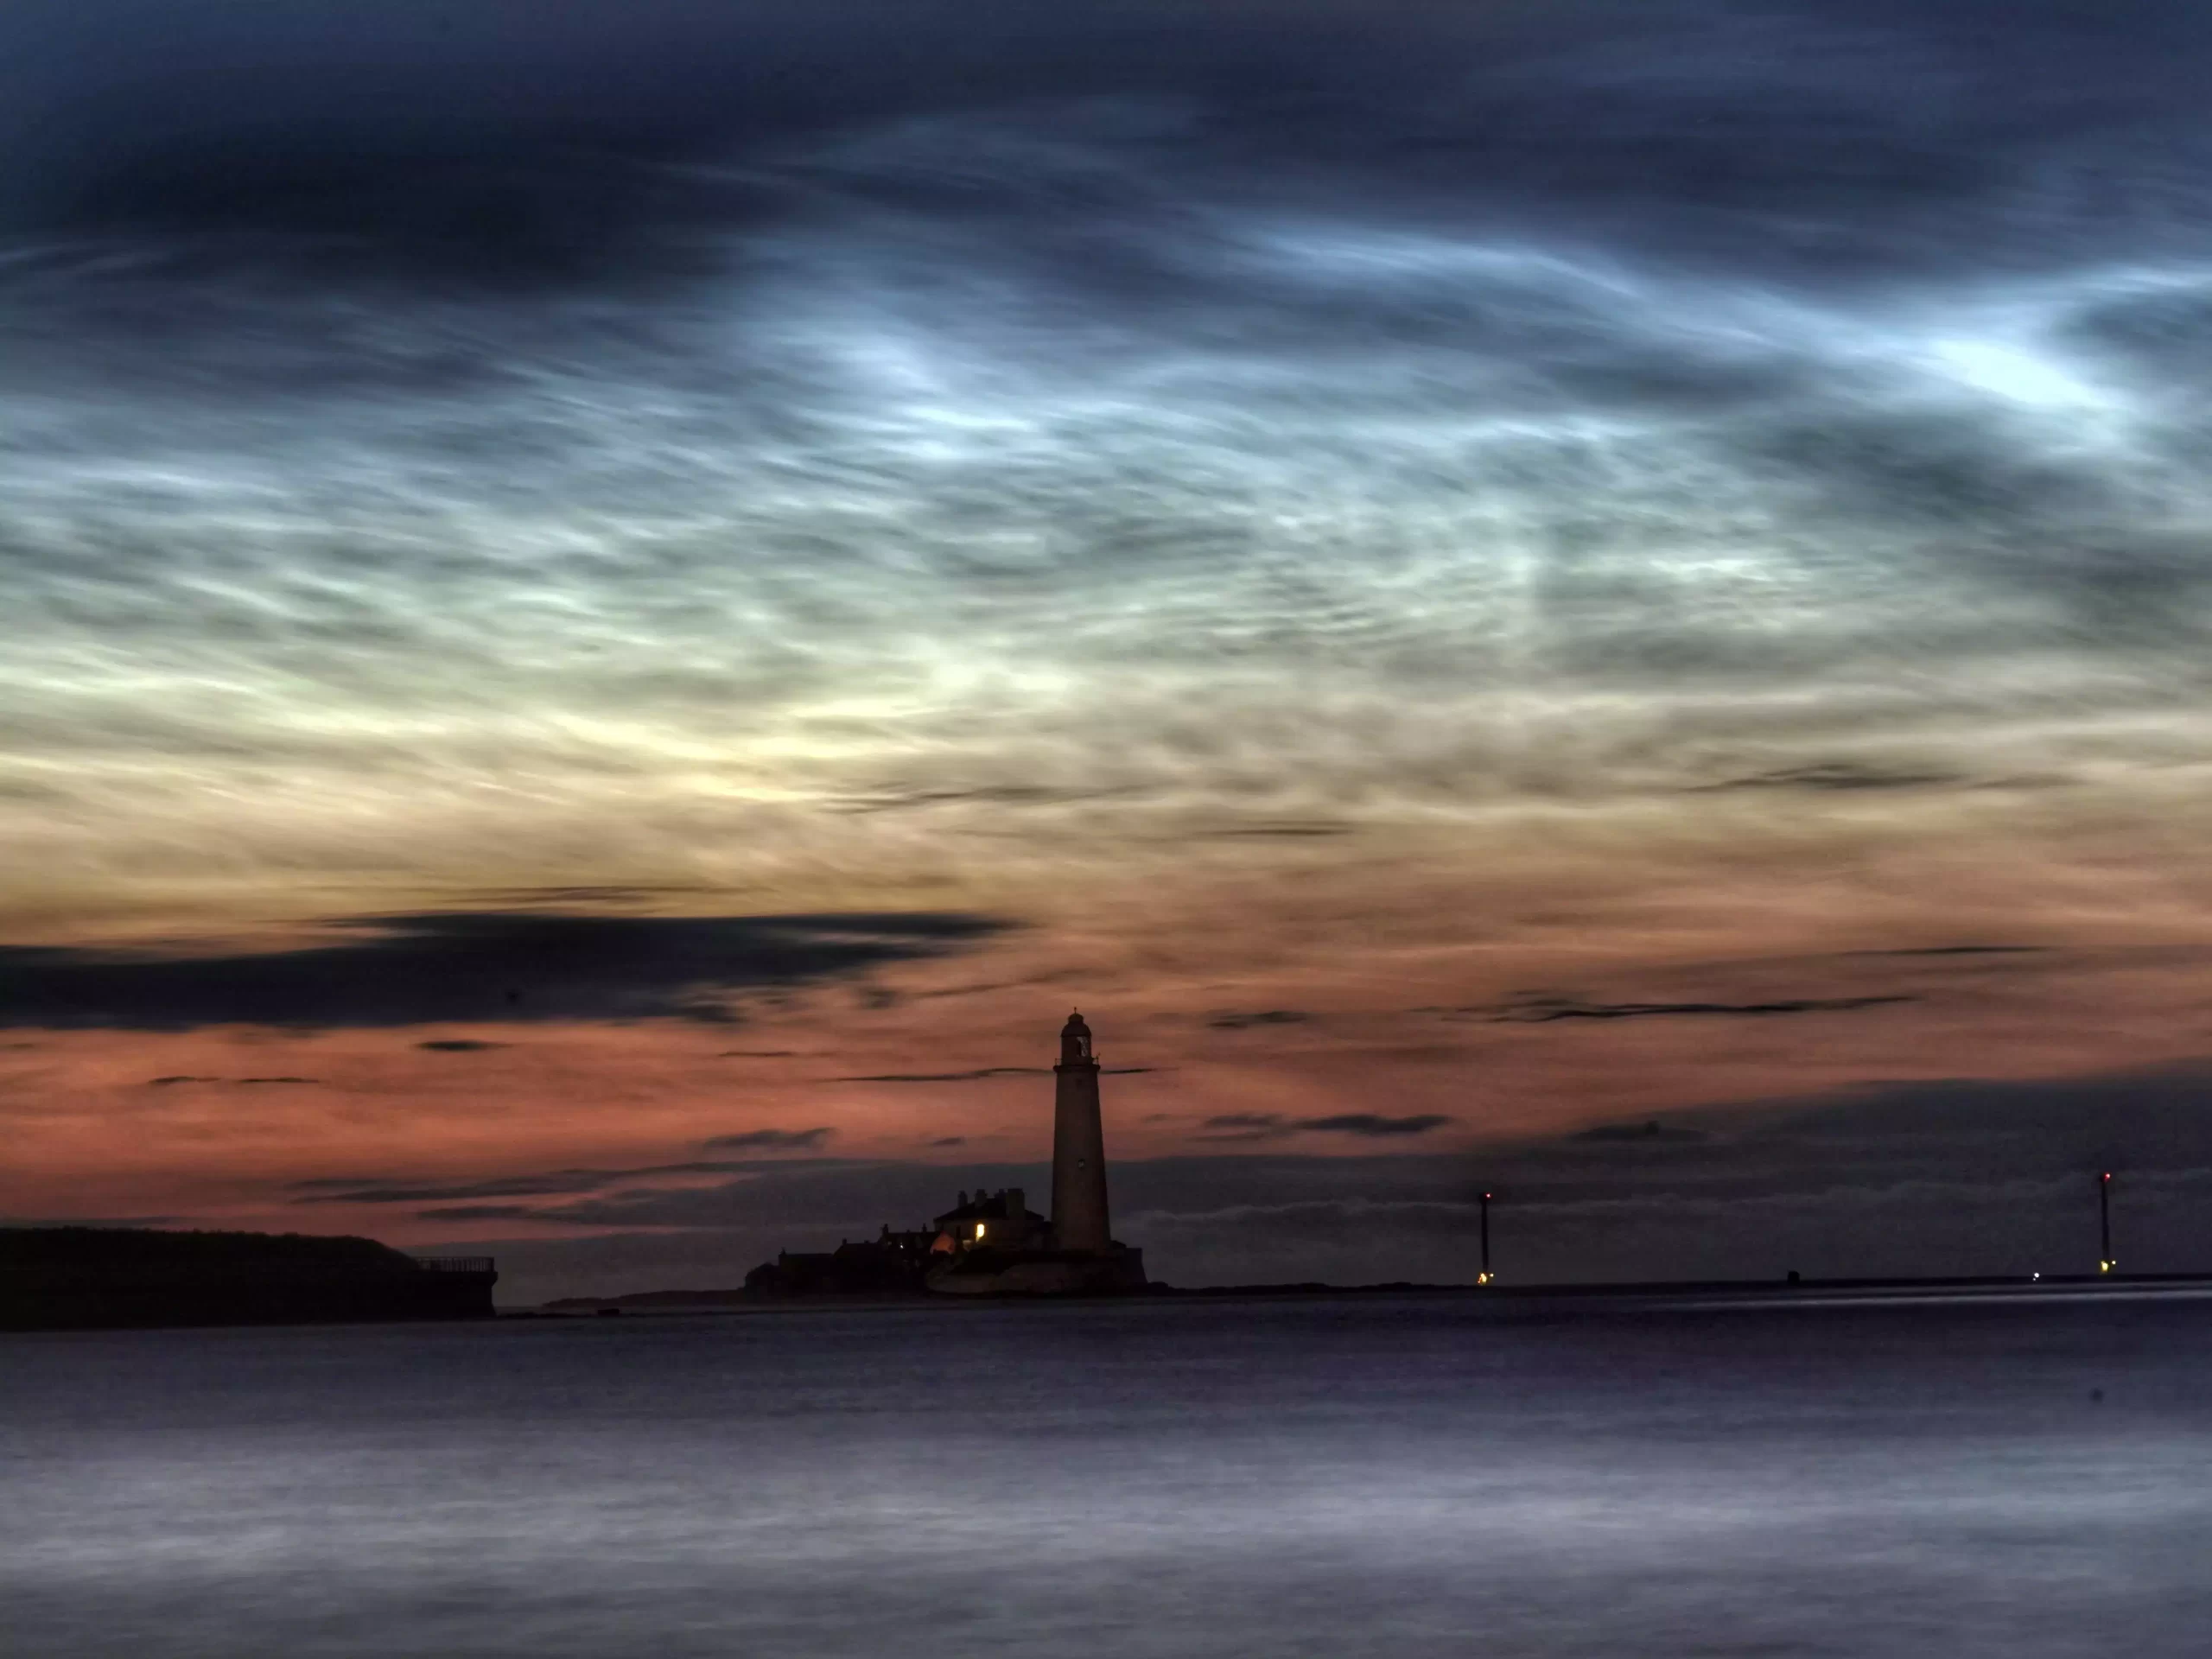 Highest, coldest, and rarest clouds on Earth are returning- How to view the strange “noctilucent clouds”